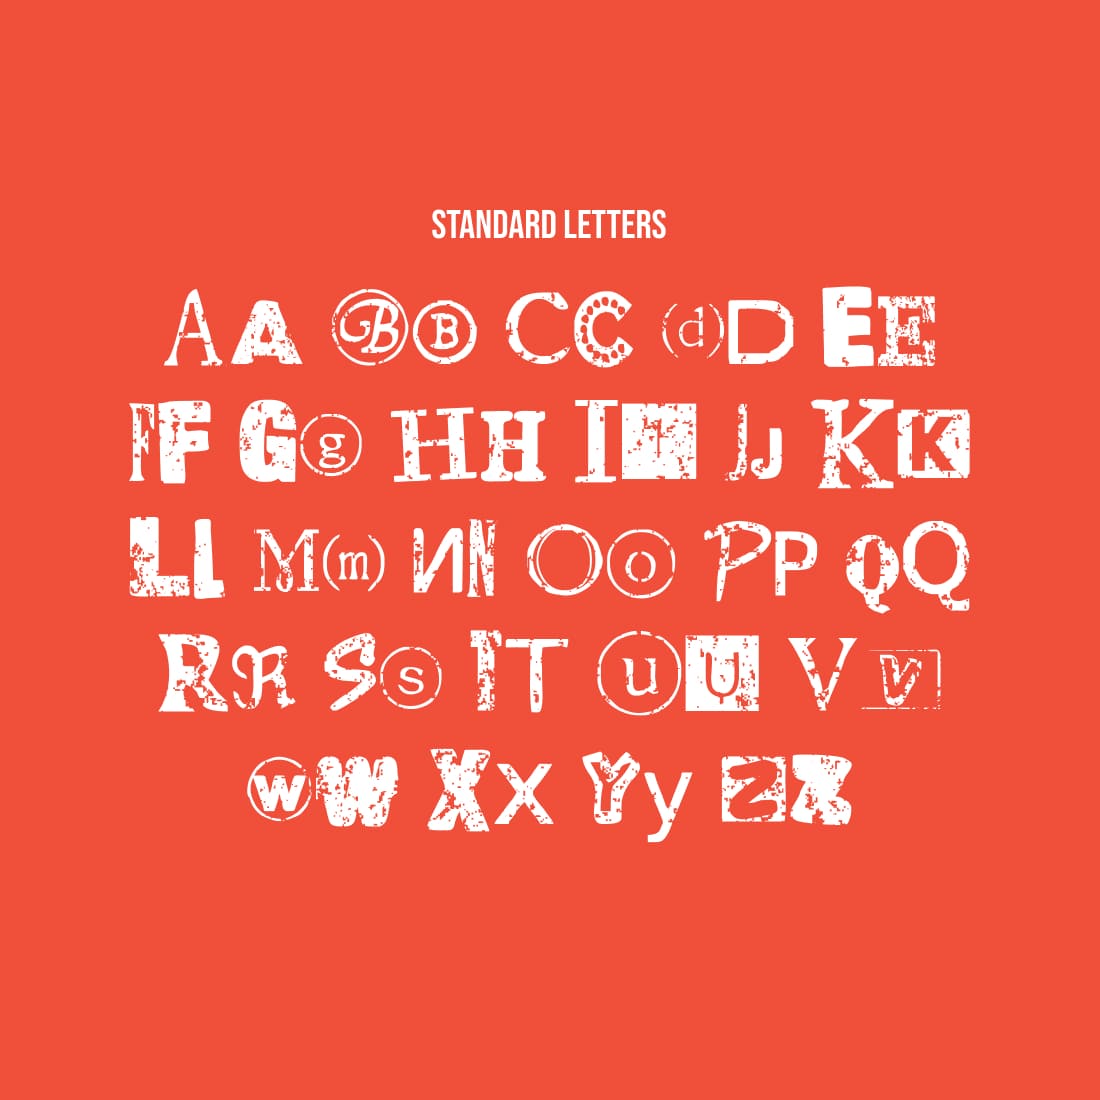 Free Distressed Ransom Note Font MasterBundles with Cover Standart Letters.